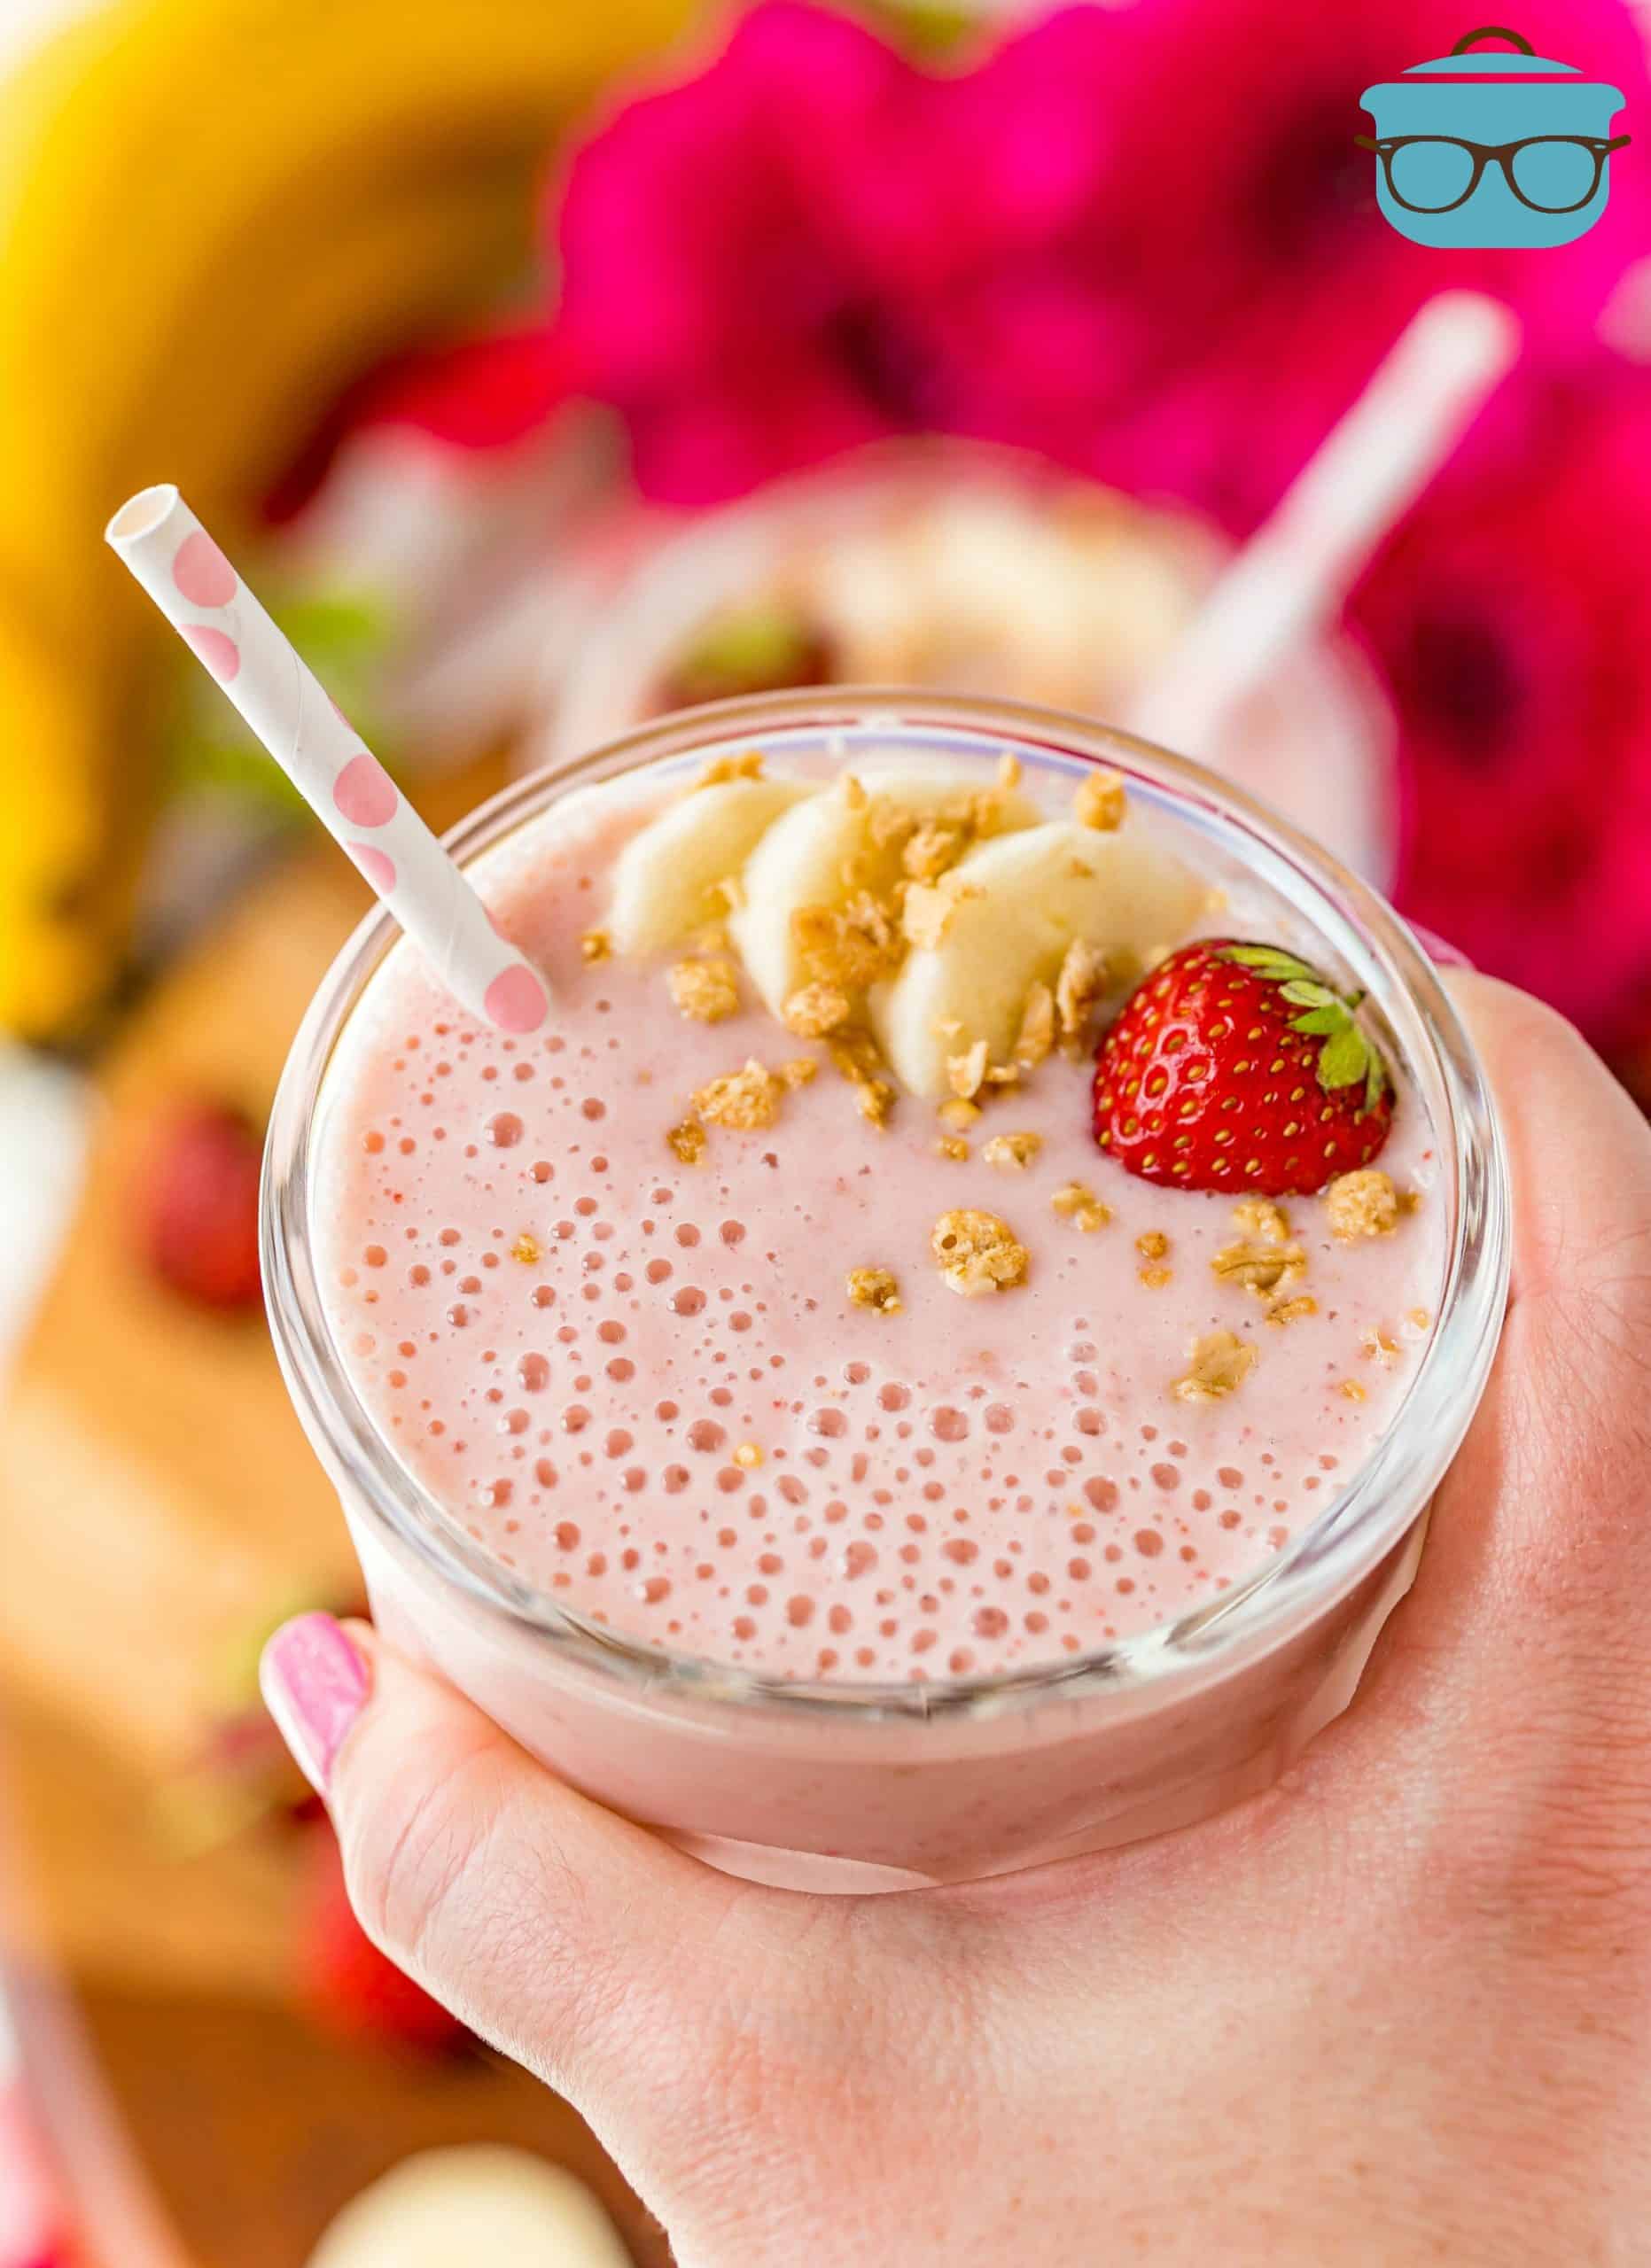 hand holding a glass filled with Strawberry Banana Smoothie.